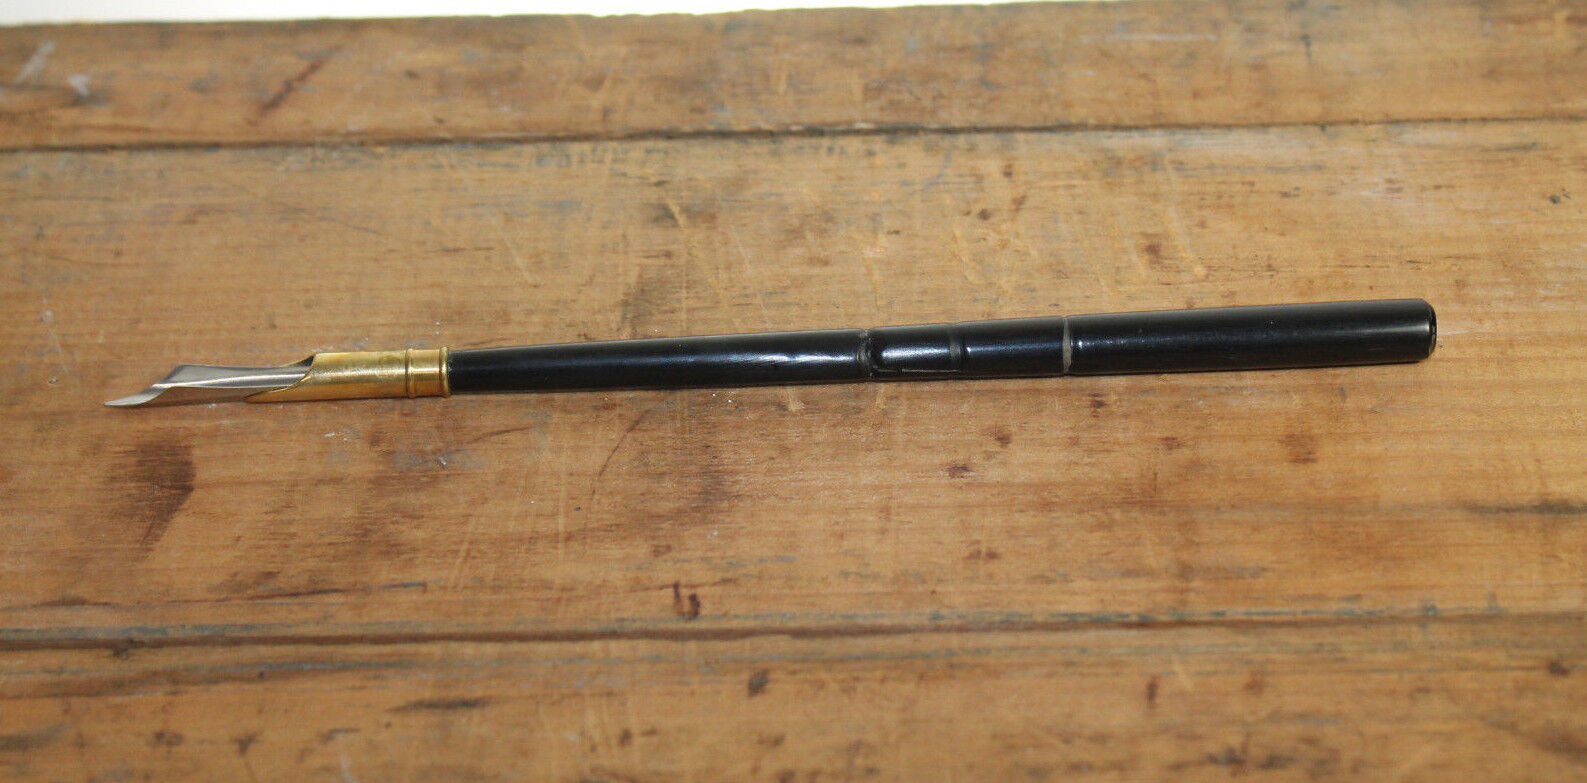  Vintage Antique Style Turned Black Horn Calligraphy Ink Dipping Pen 